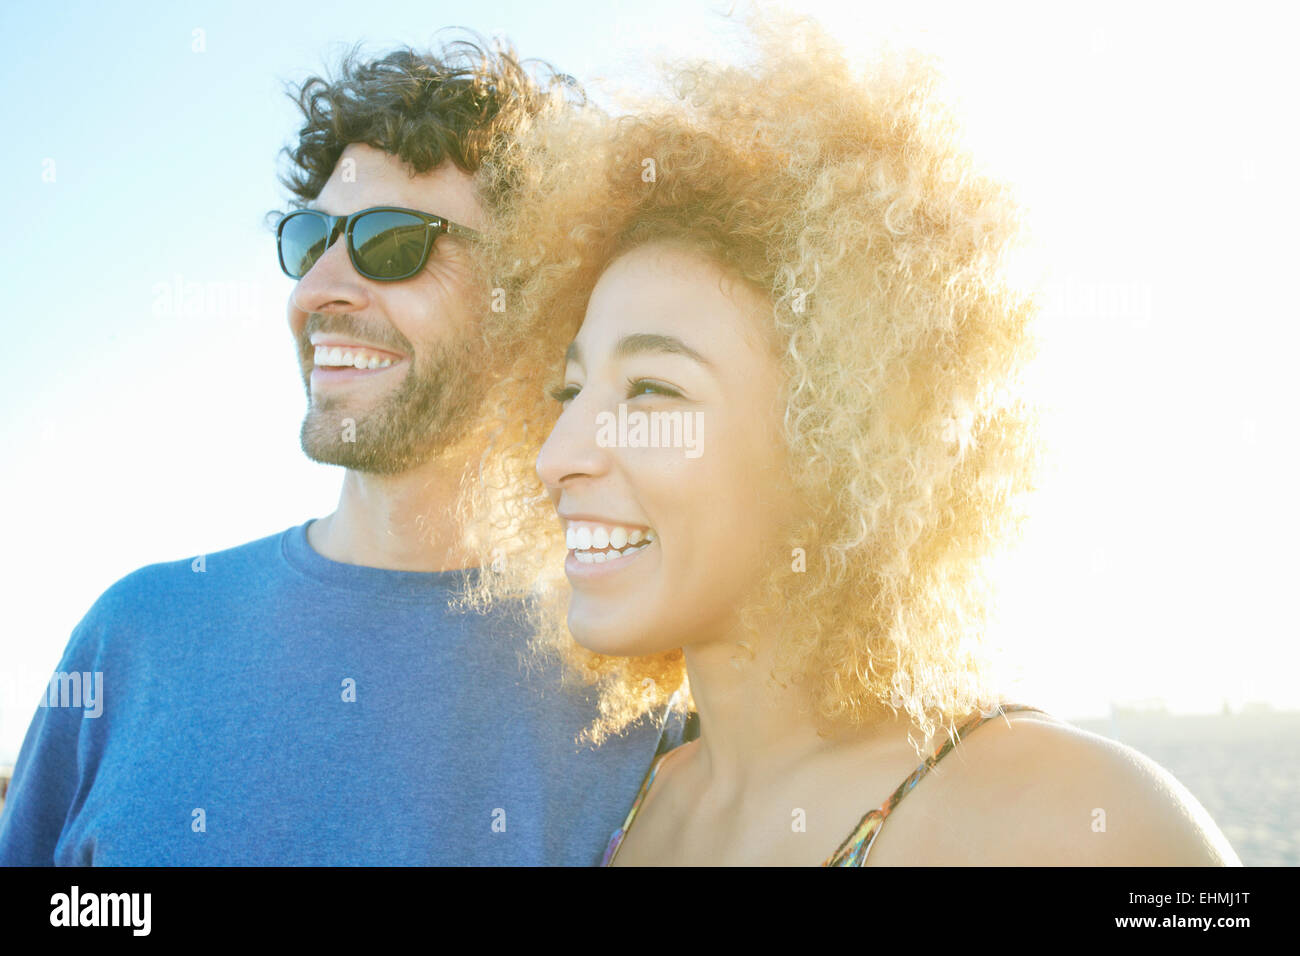 Smiling couple laughing outdoors Stock Photo